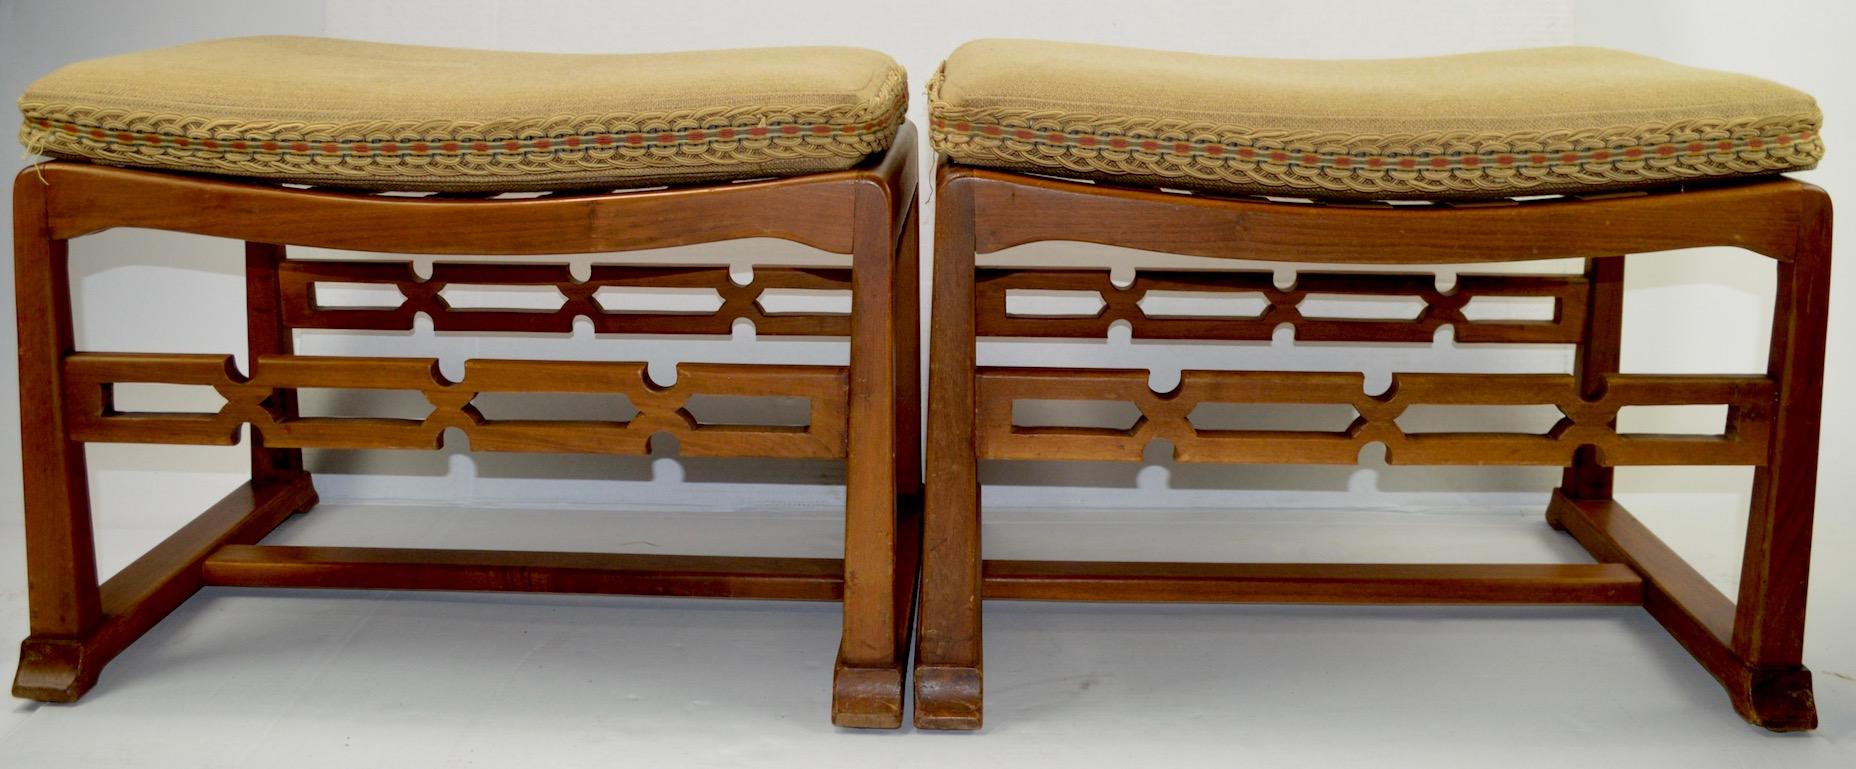 Upholstery Pair of Chinese Style Asia Modern Stool, Bench, Footrest, Ottomans